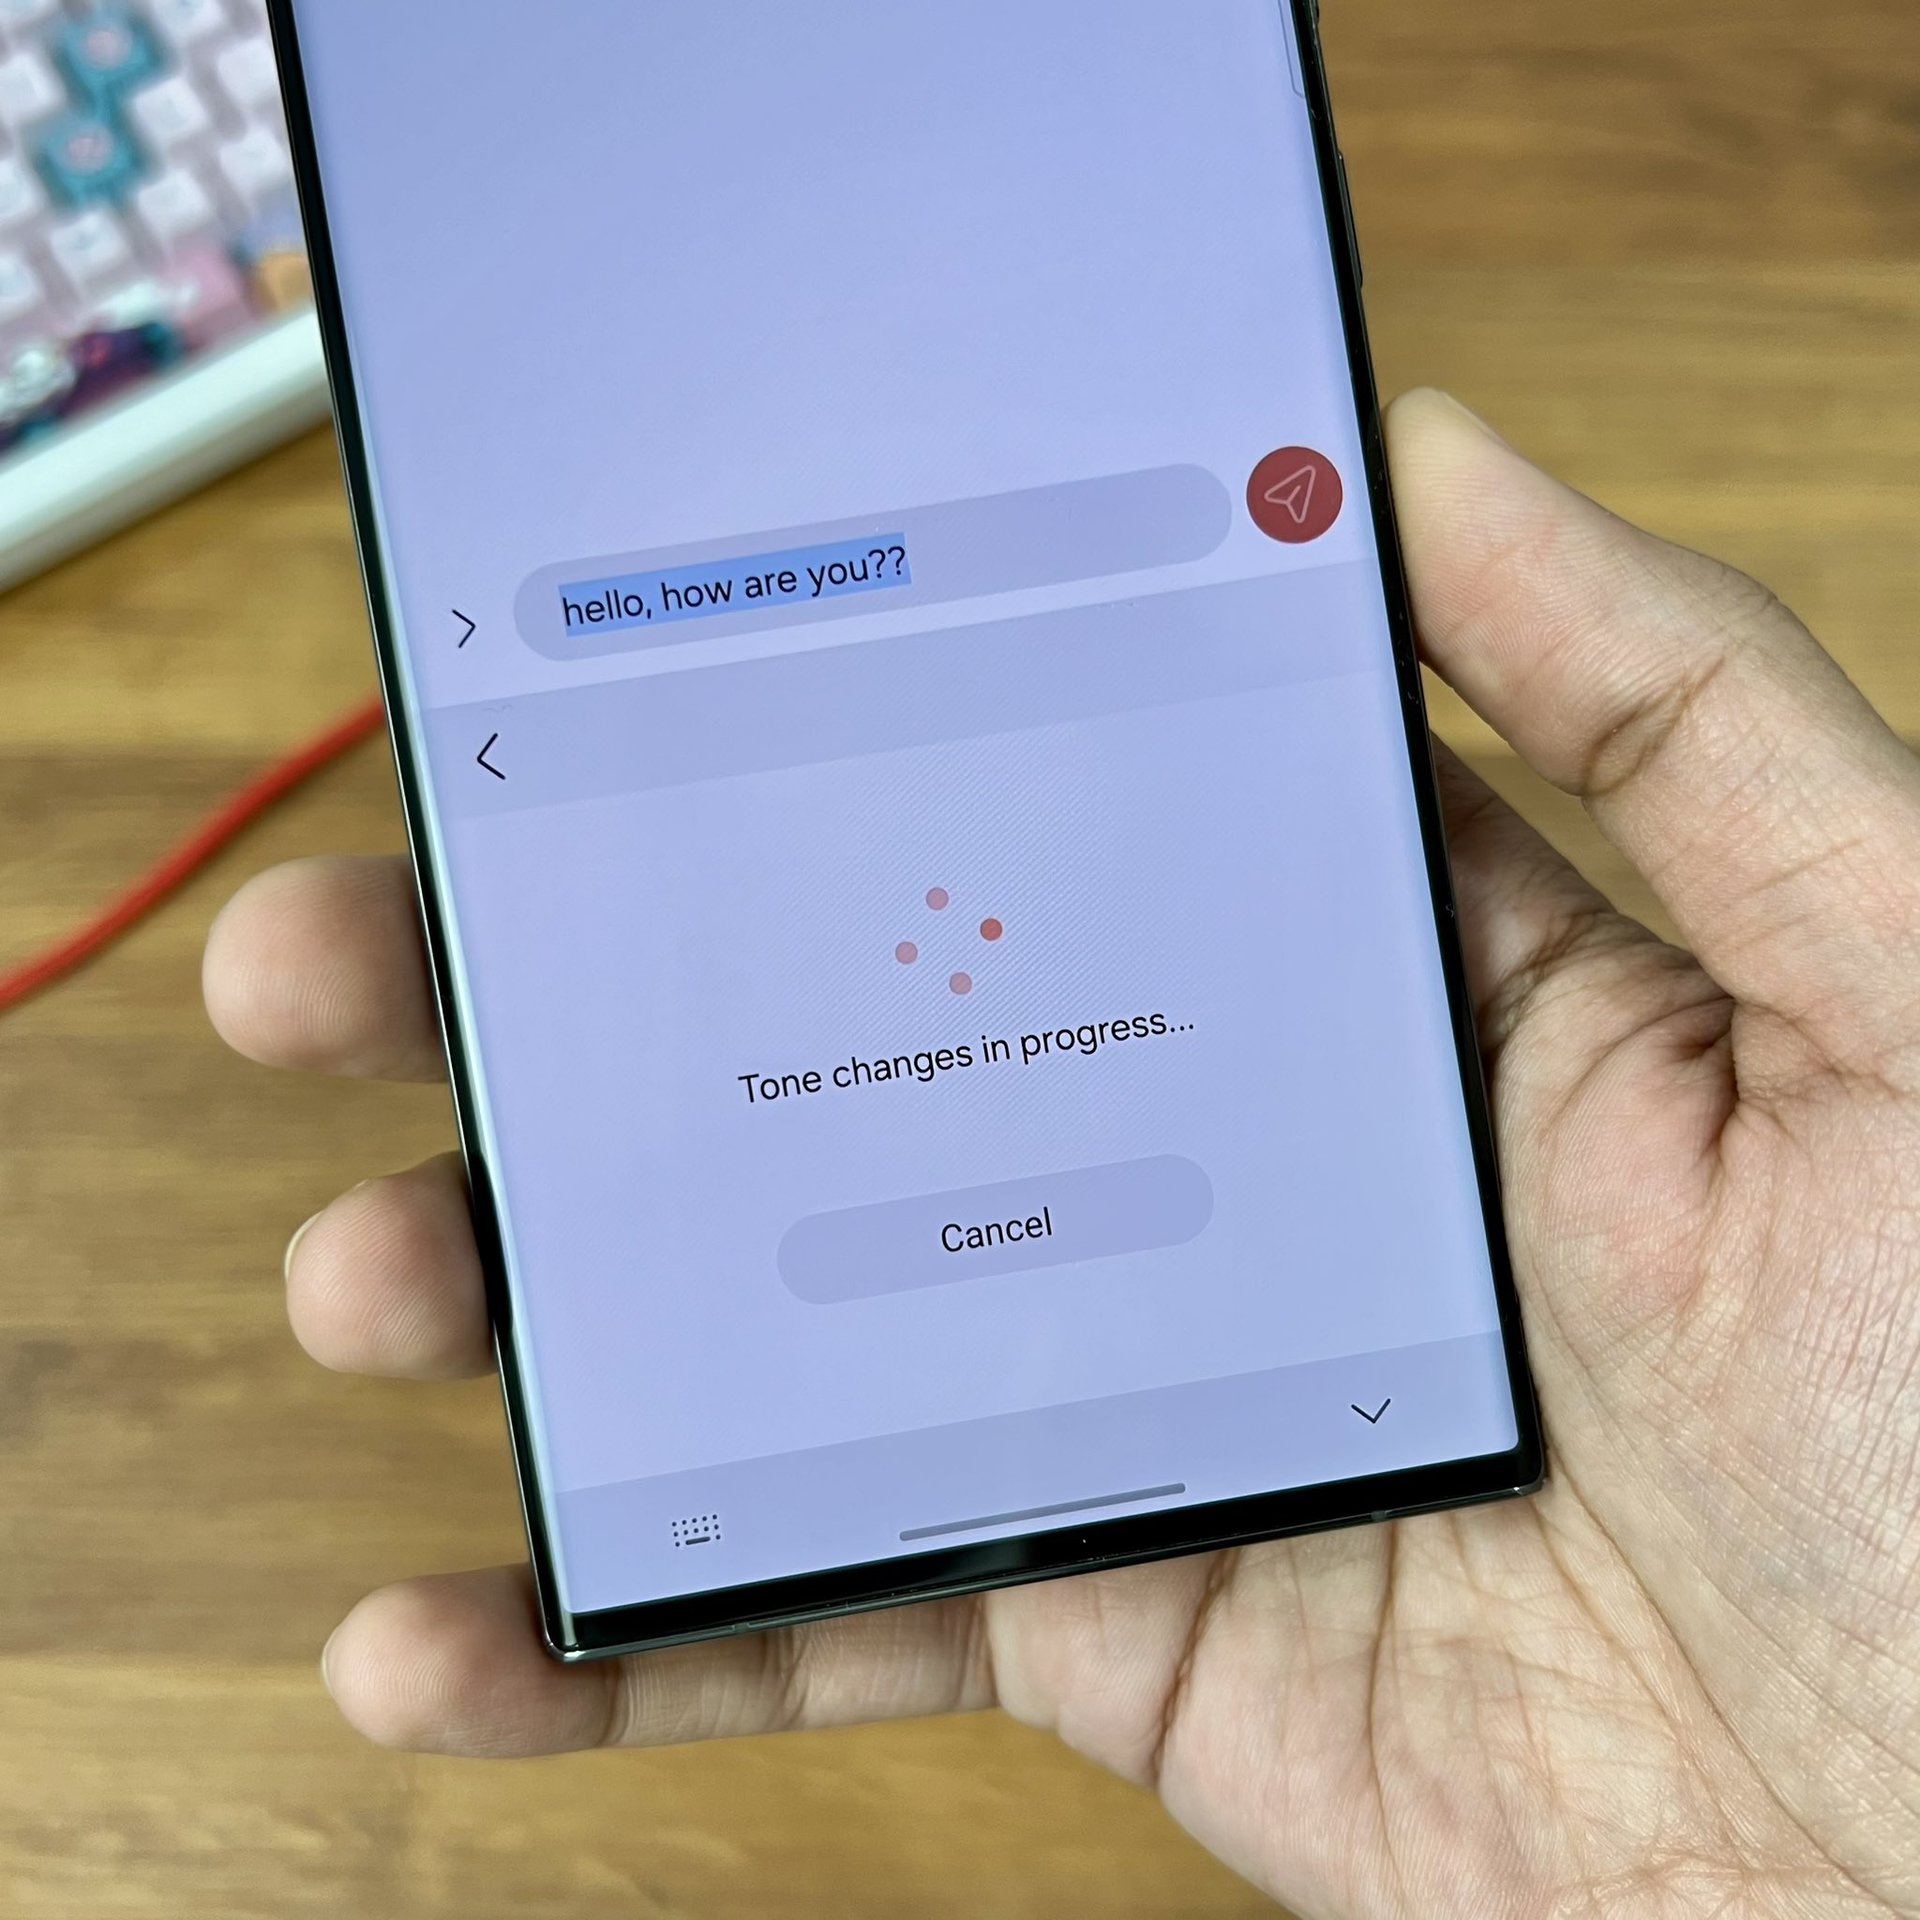 Samsung Notes and Keyboard could level-up with these Galaxy AI-powered features